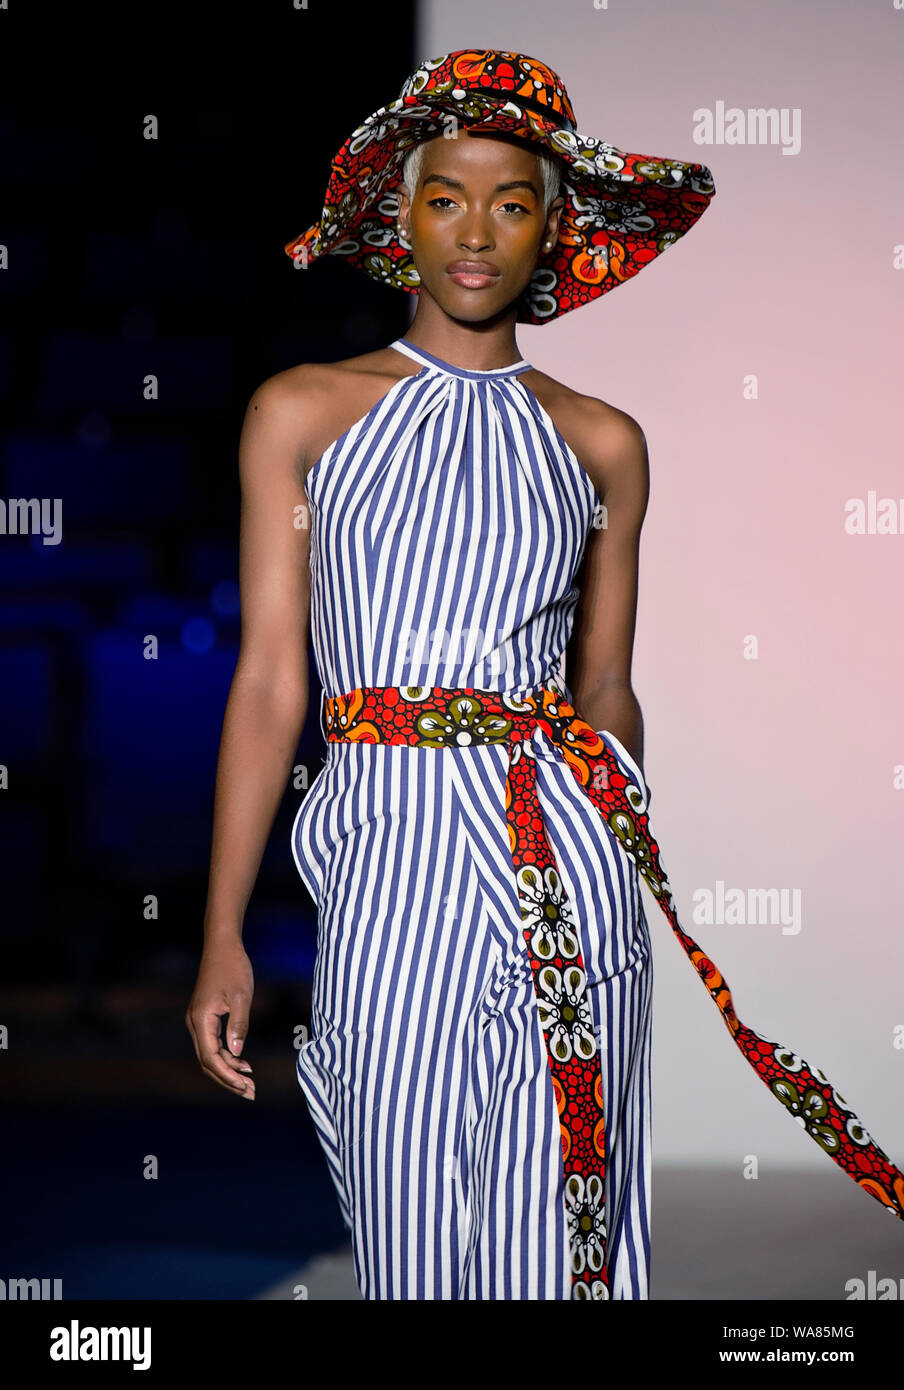 Africa Fashion Show London 2019. Selected image from runway shows ...